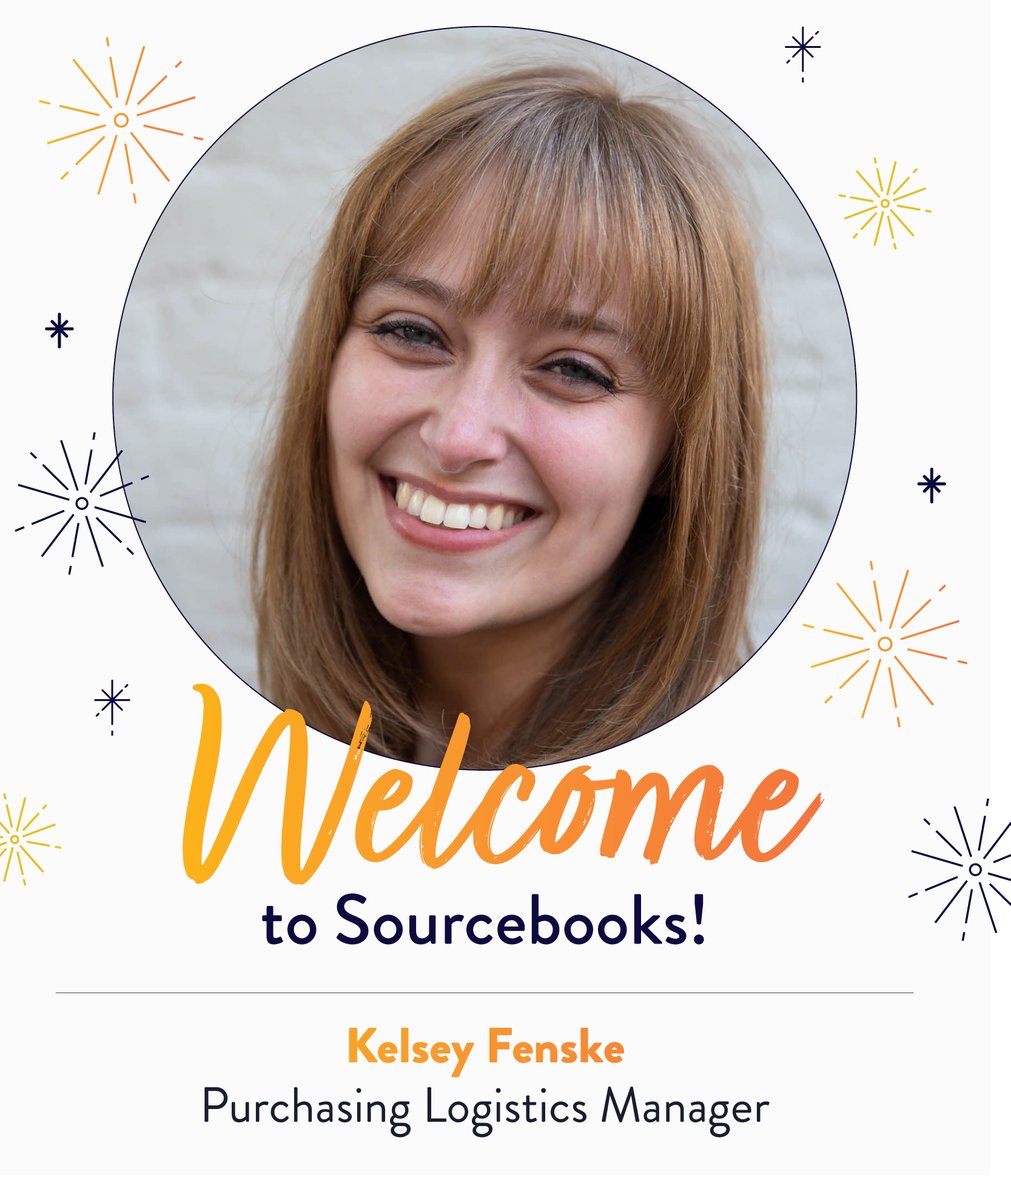 🎈Join us in welcoming (back) Kelsey Fenske! 📚 As Purchasing Logisitics Manager, she'll be working on proofs & with the manufacturing team, fulfillment, printers, & shippers to oversee the flow of inventory into the warehouse - ultimately, into customers' hands. Welcome Kelsey!